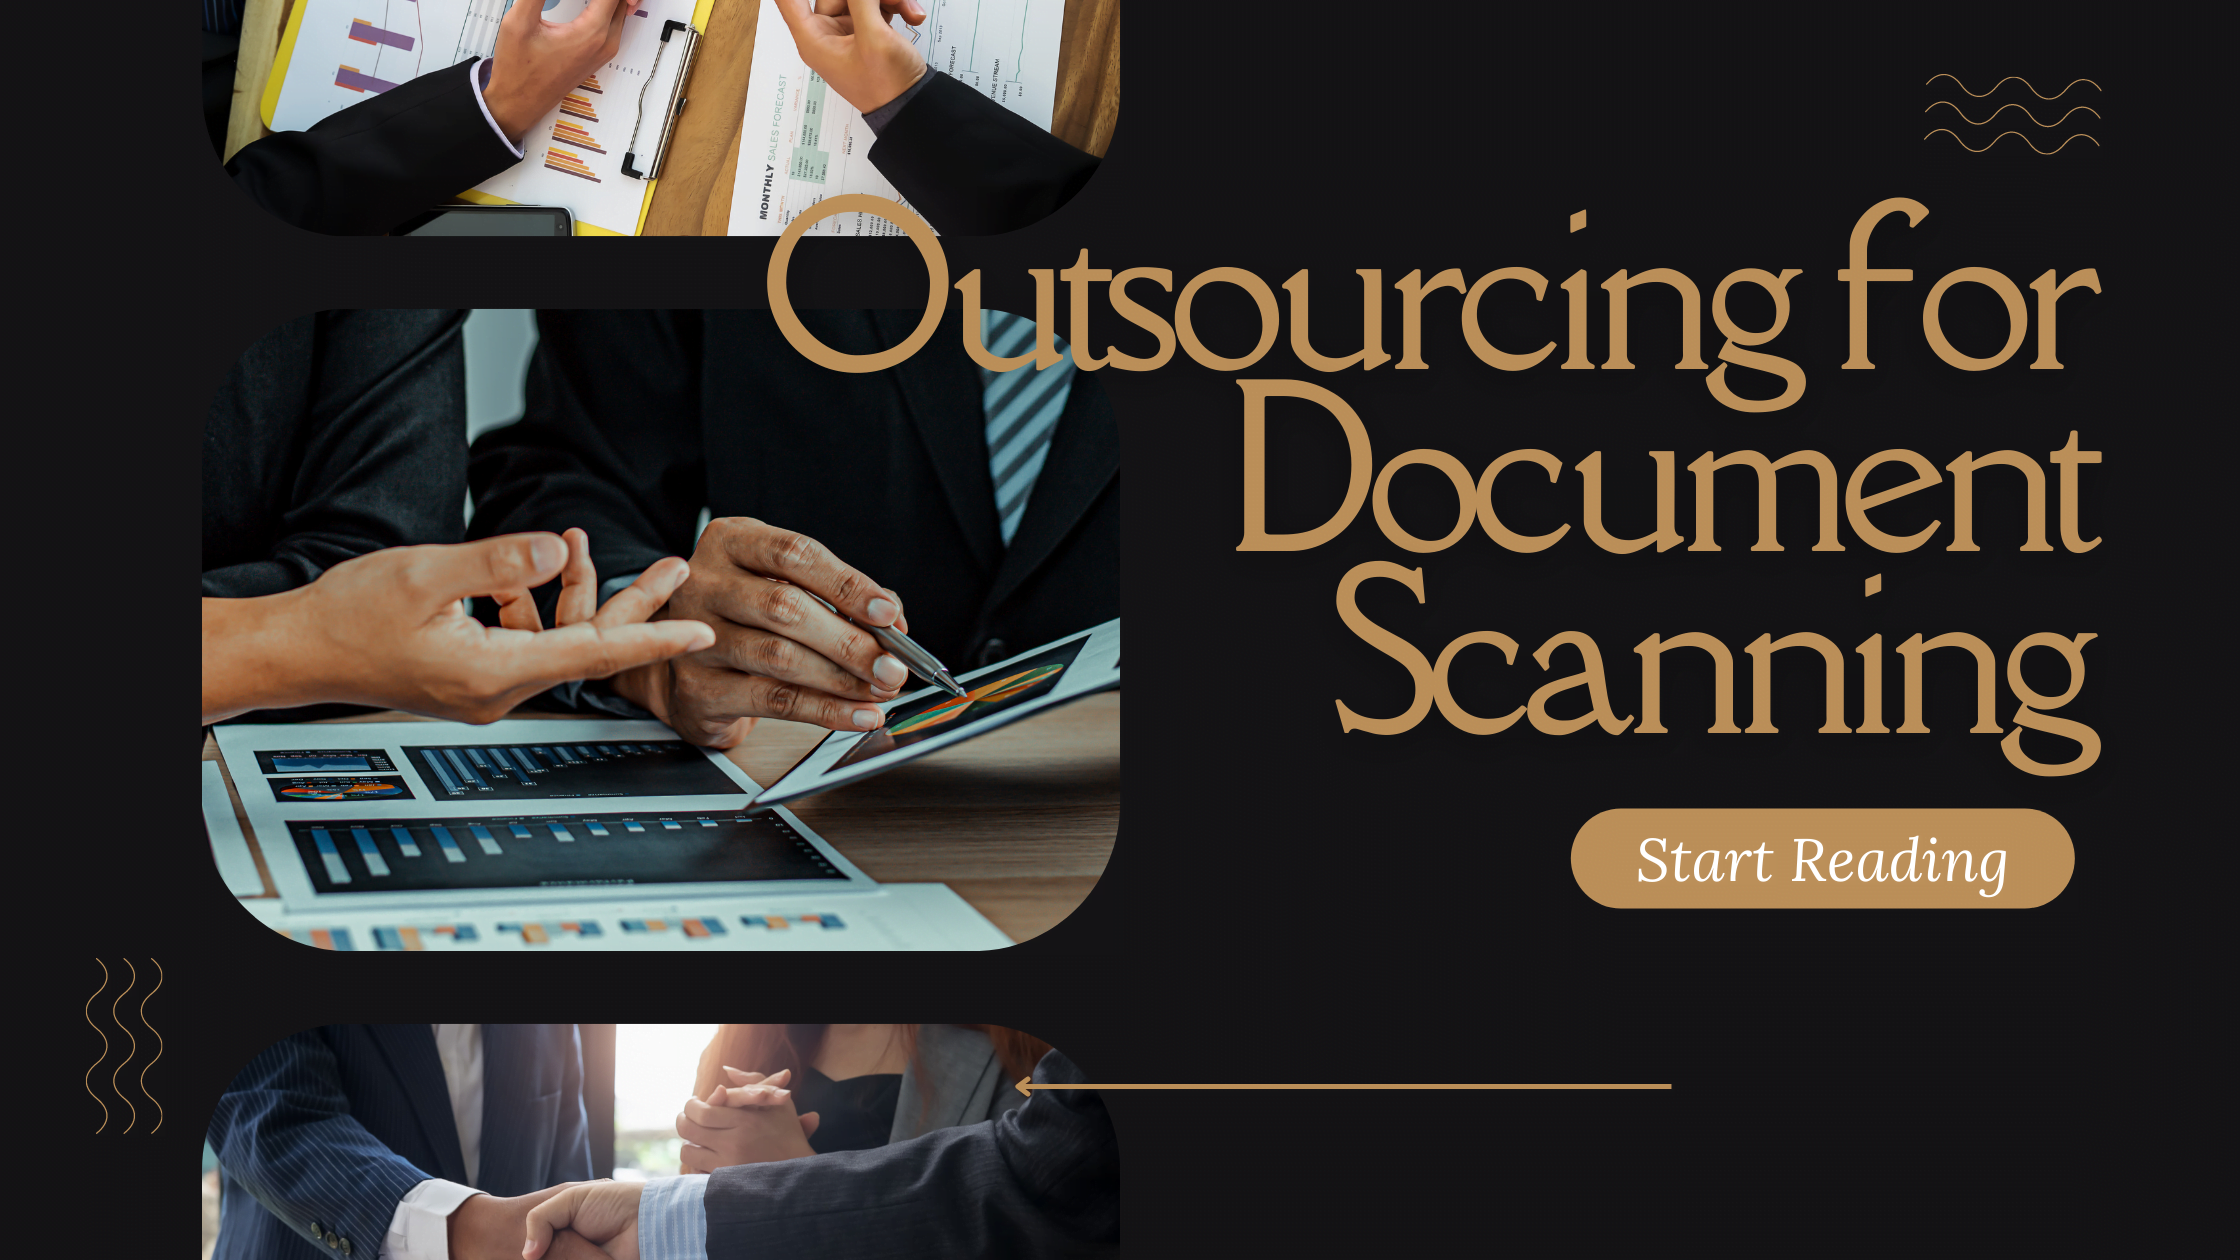 Why Should You Consider Outsourcing for Document Scanning?